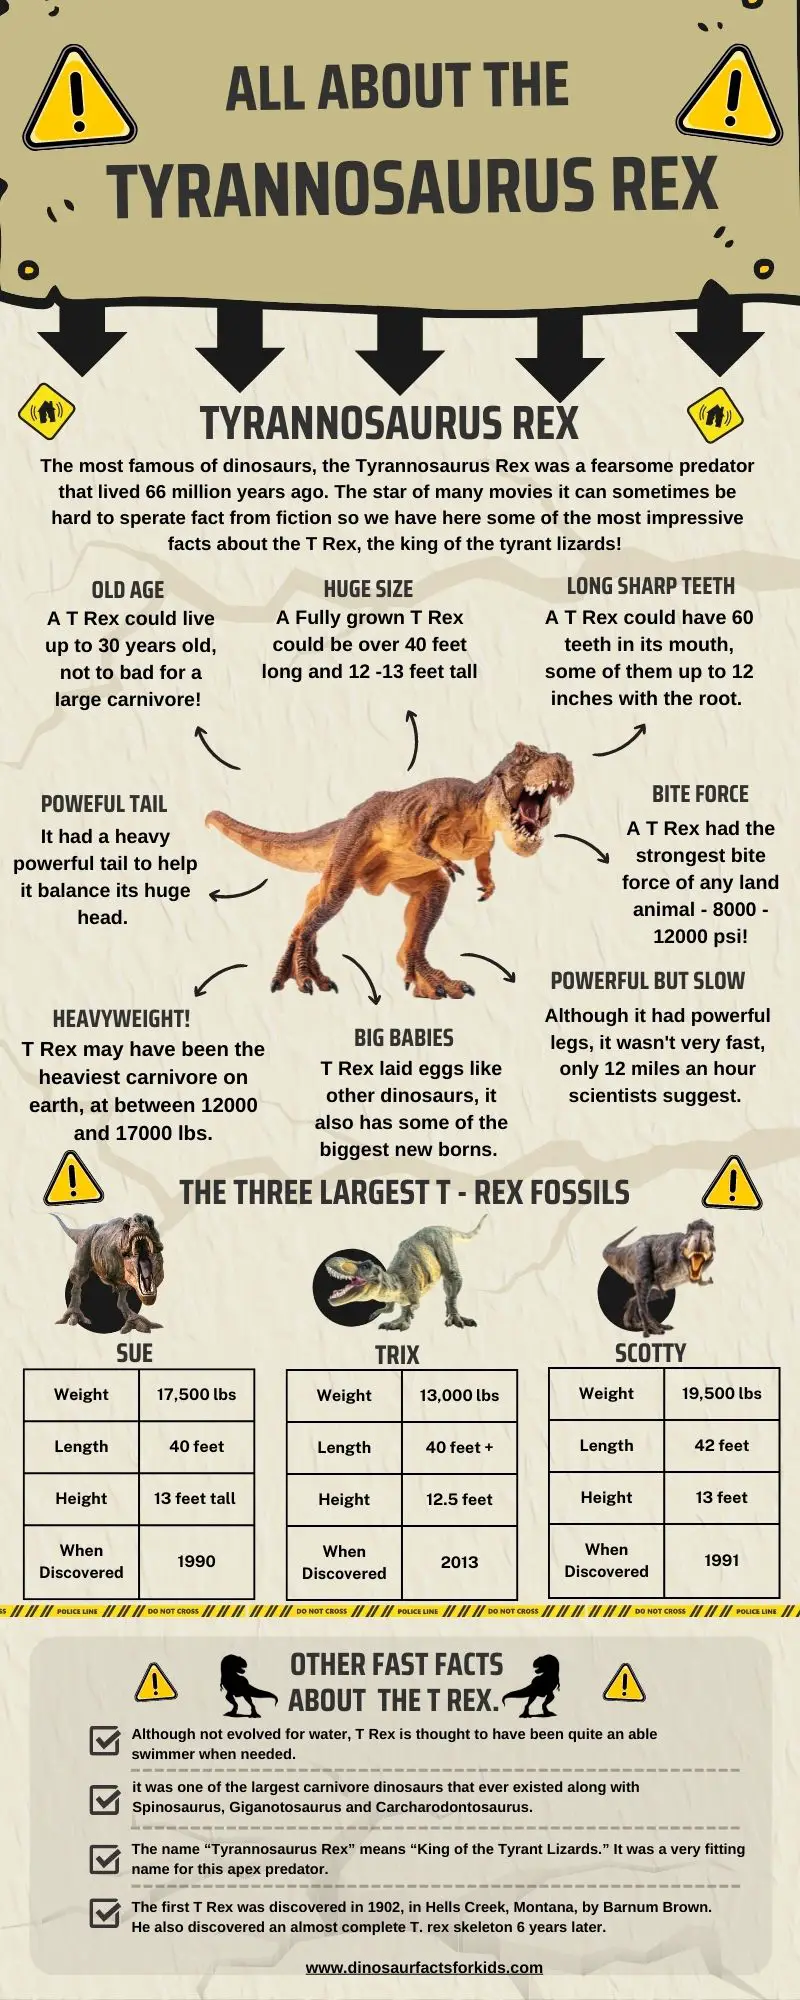 Did The T-Rex Lay Eggs? - Dinosaur Facts For Kids